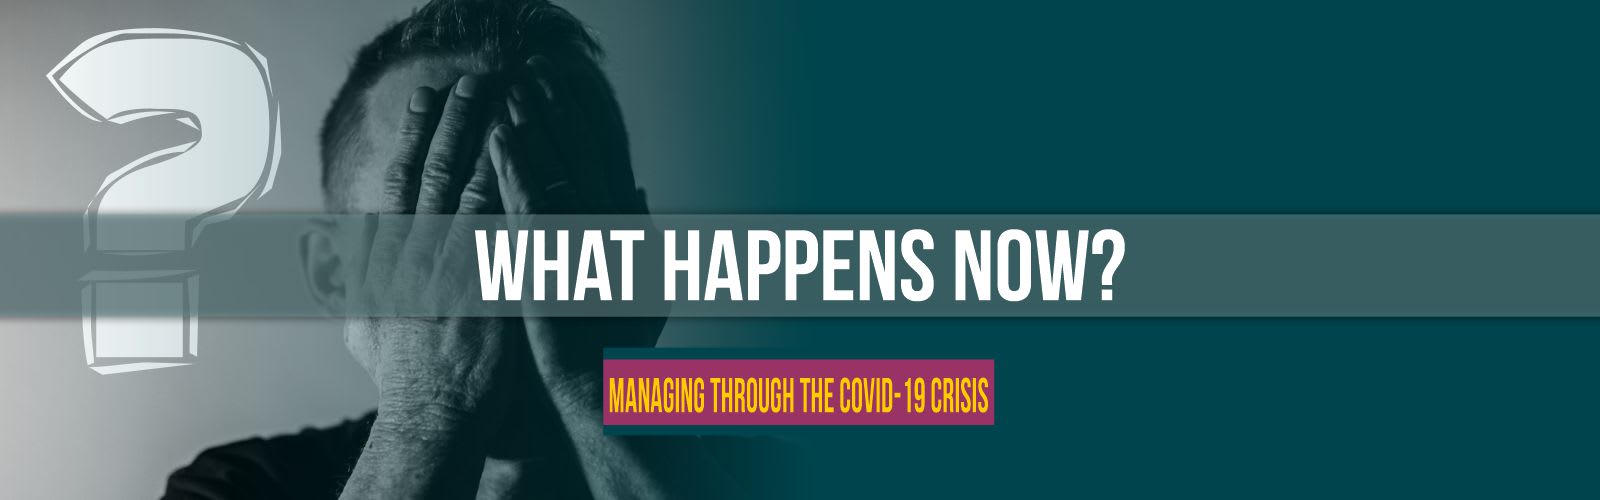 What happens now - covid-19 business